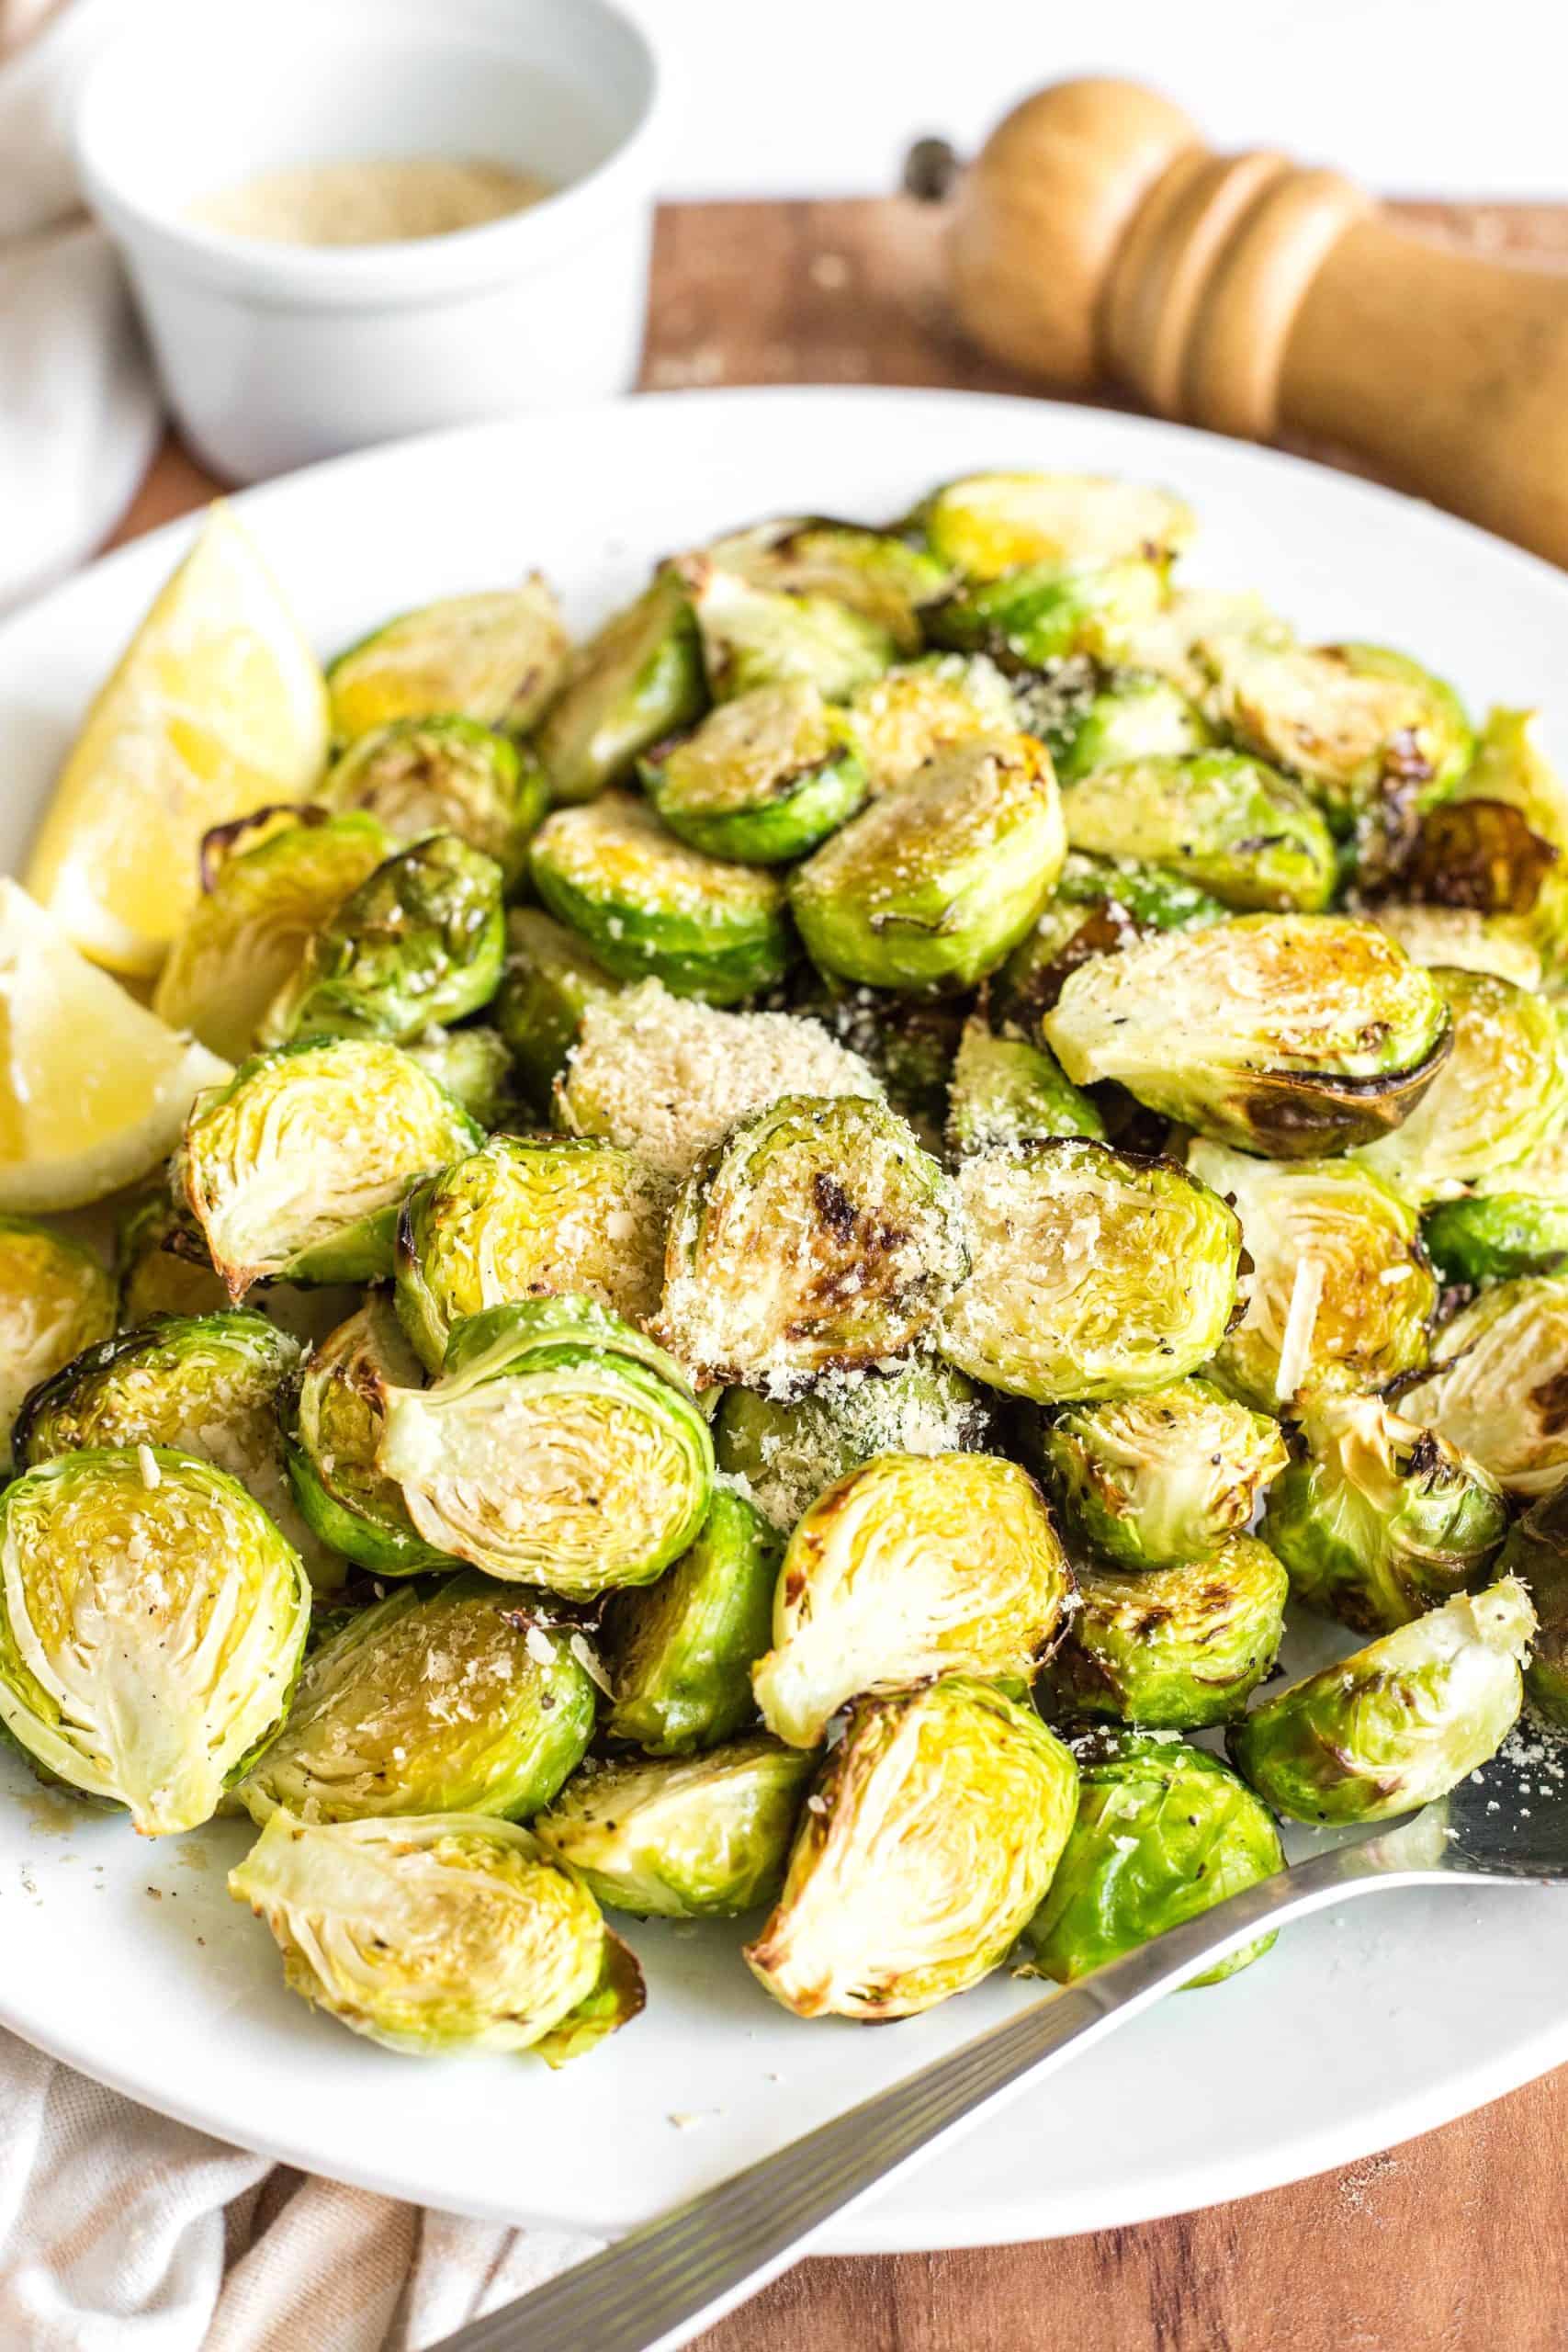 A plate full of air fryer Brussels sprouts on a wooden board.